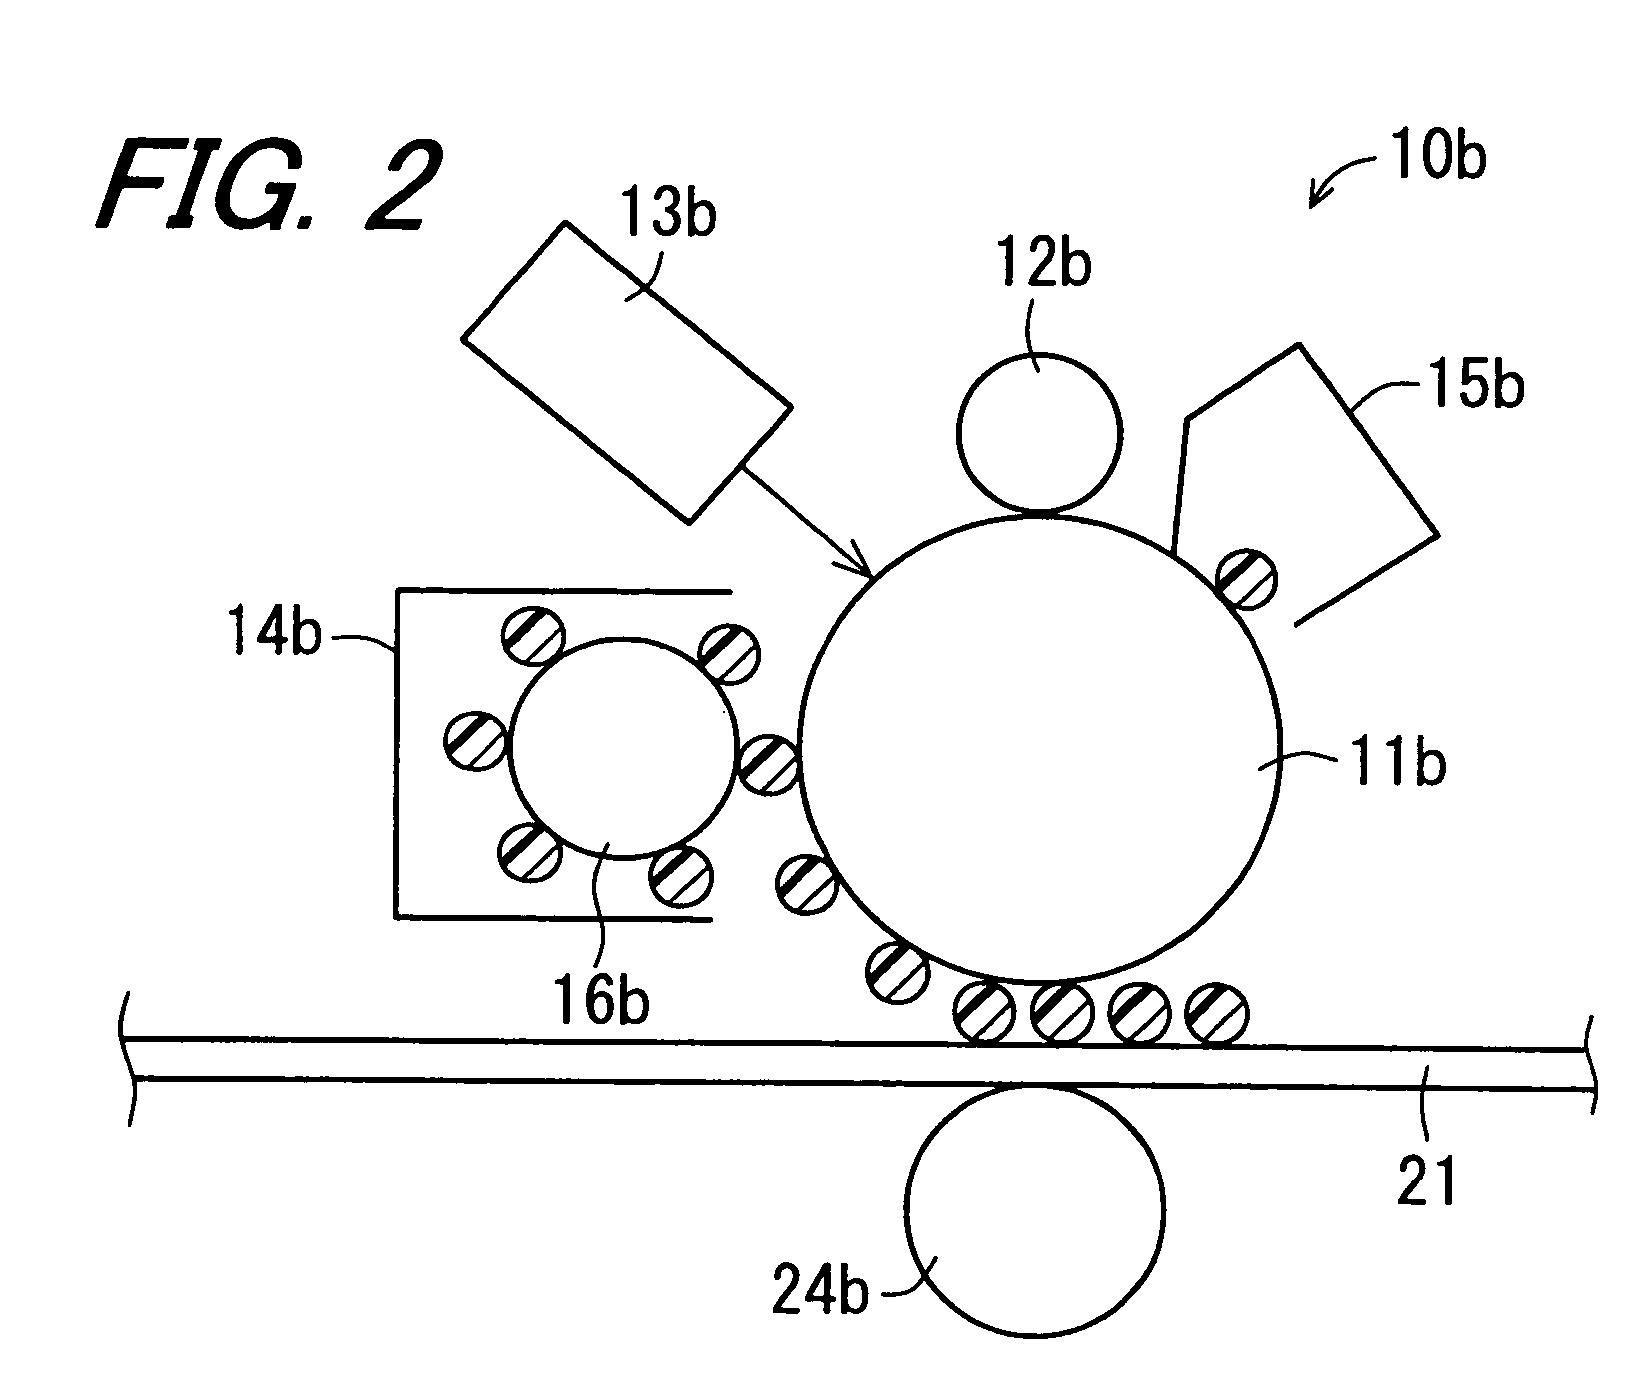 Image forming apparatus with increased transfer efficiency